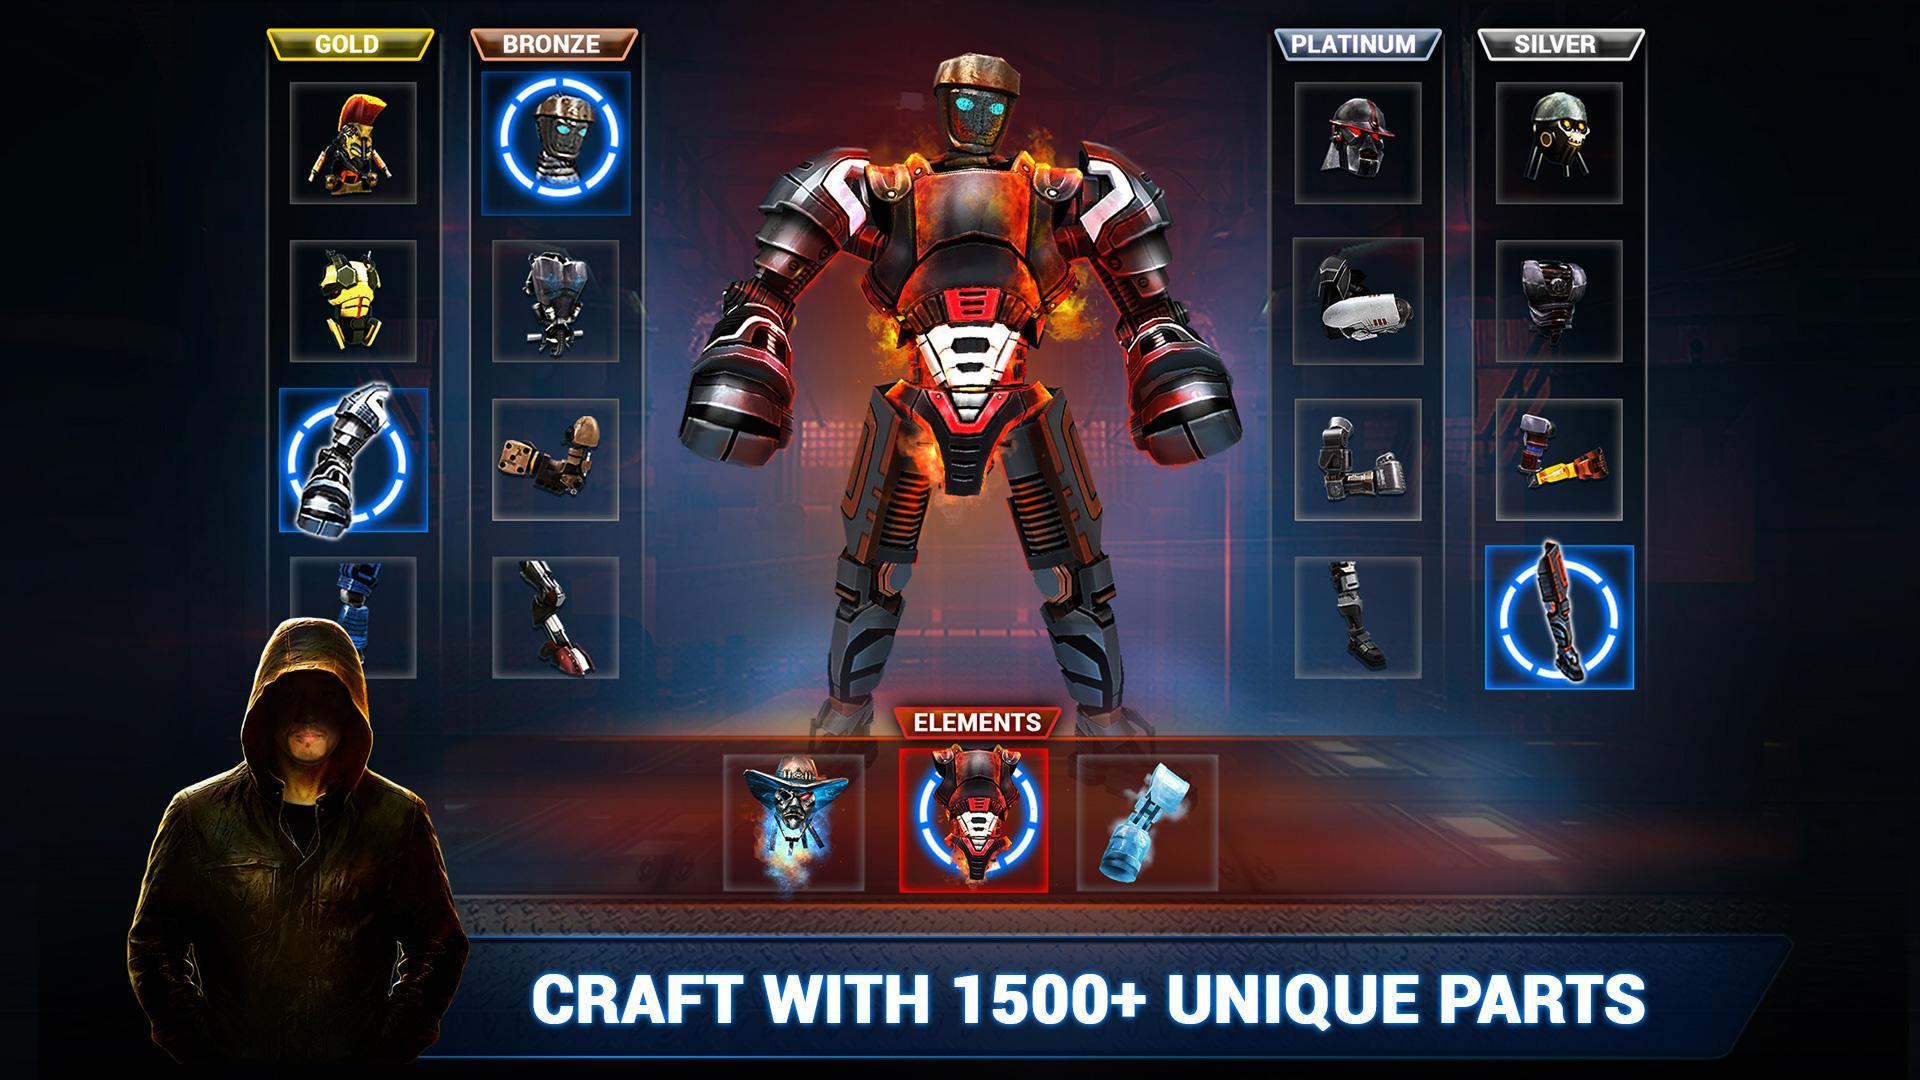 Real Steel Boxing Champions MOD APK 67.67.204 (Unlimited Money)